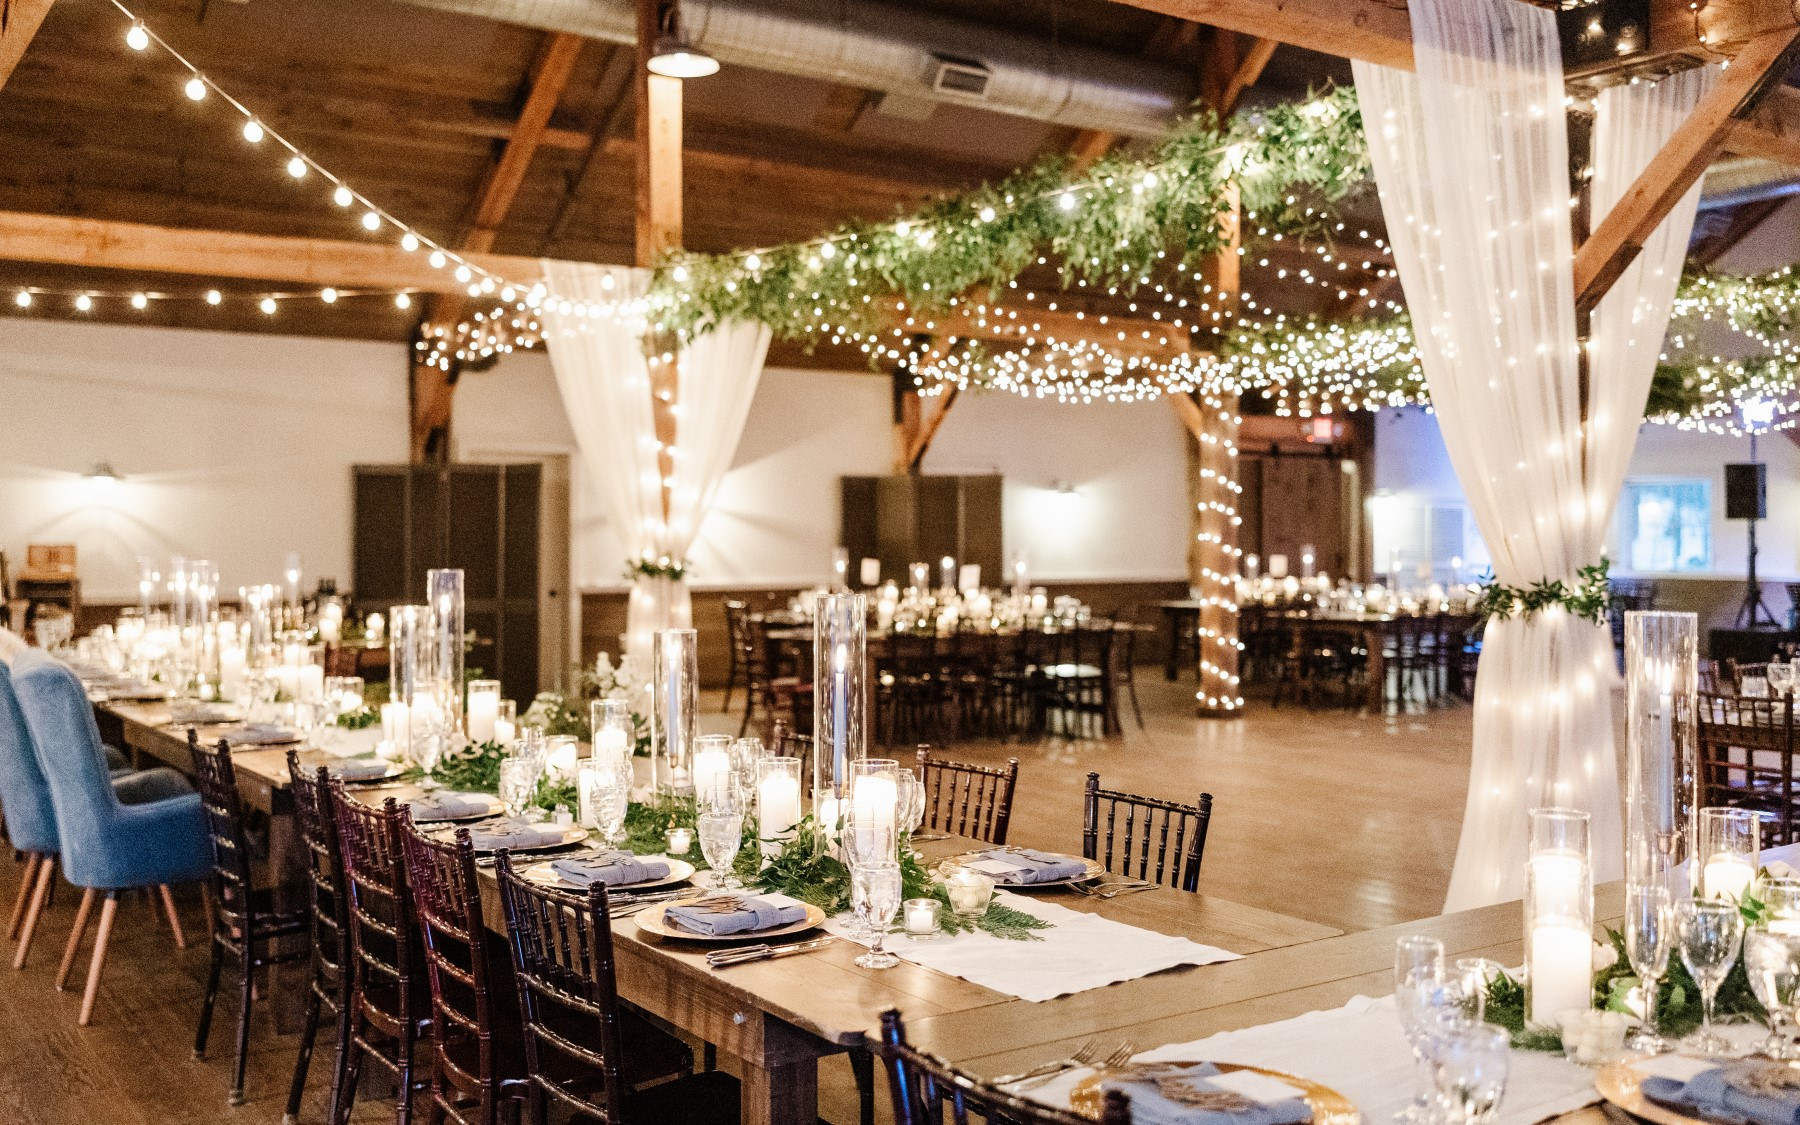 event barn featuring long farmhouse tables, greenery on tables with blue linens, and lights, greenery, and drapery from the top of the event barn.